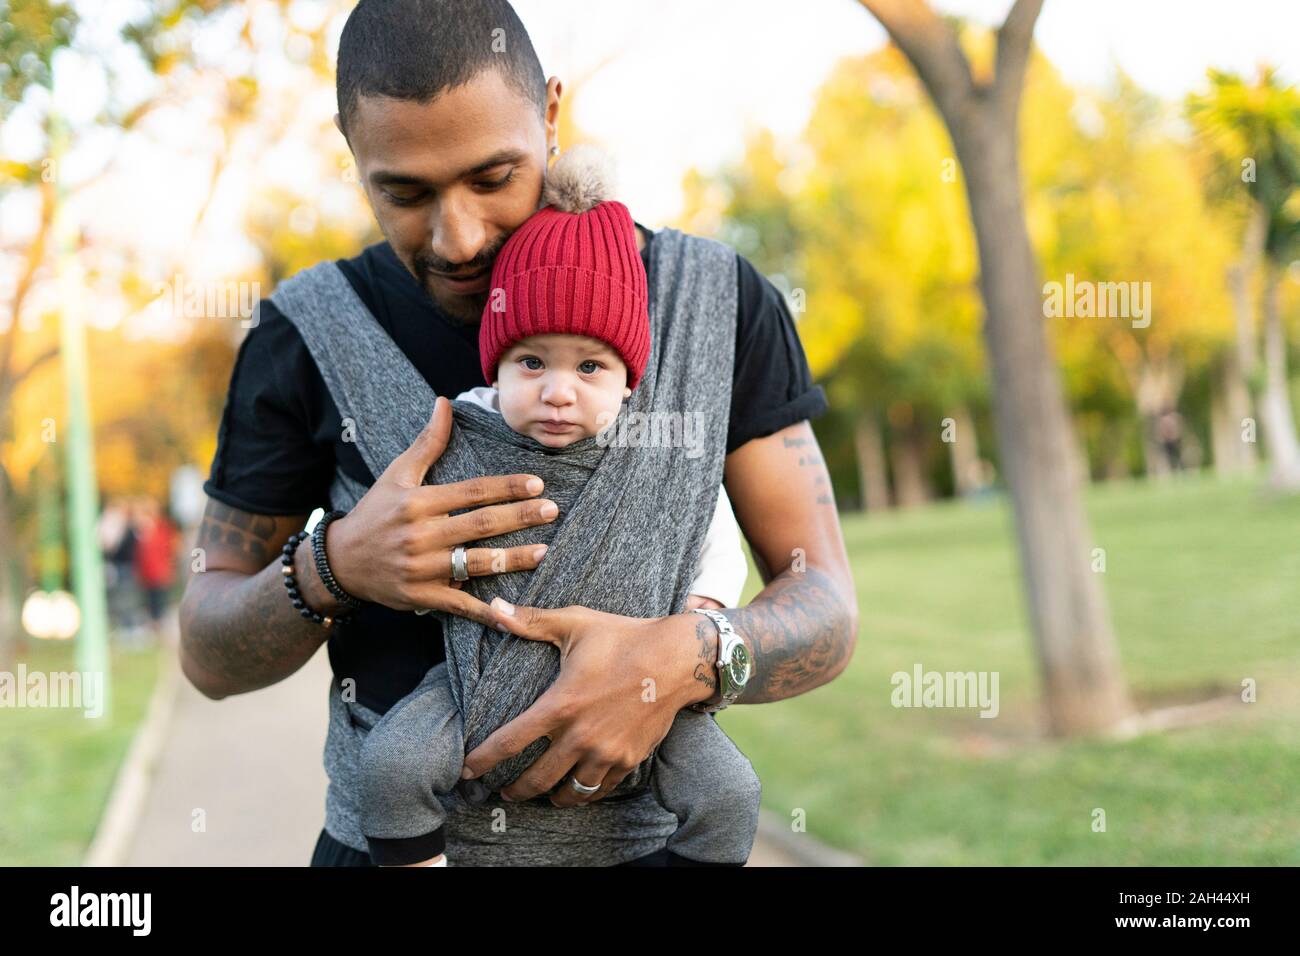 Young father carrying baby son in a baby sling Stock Photo